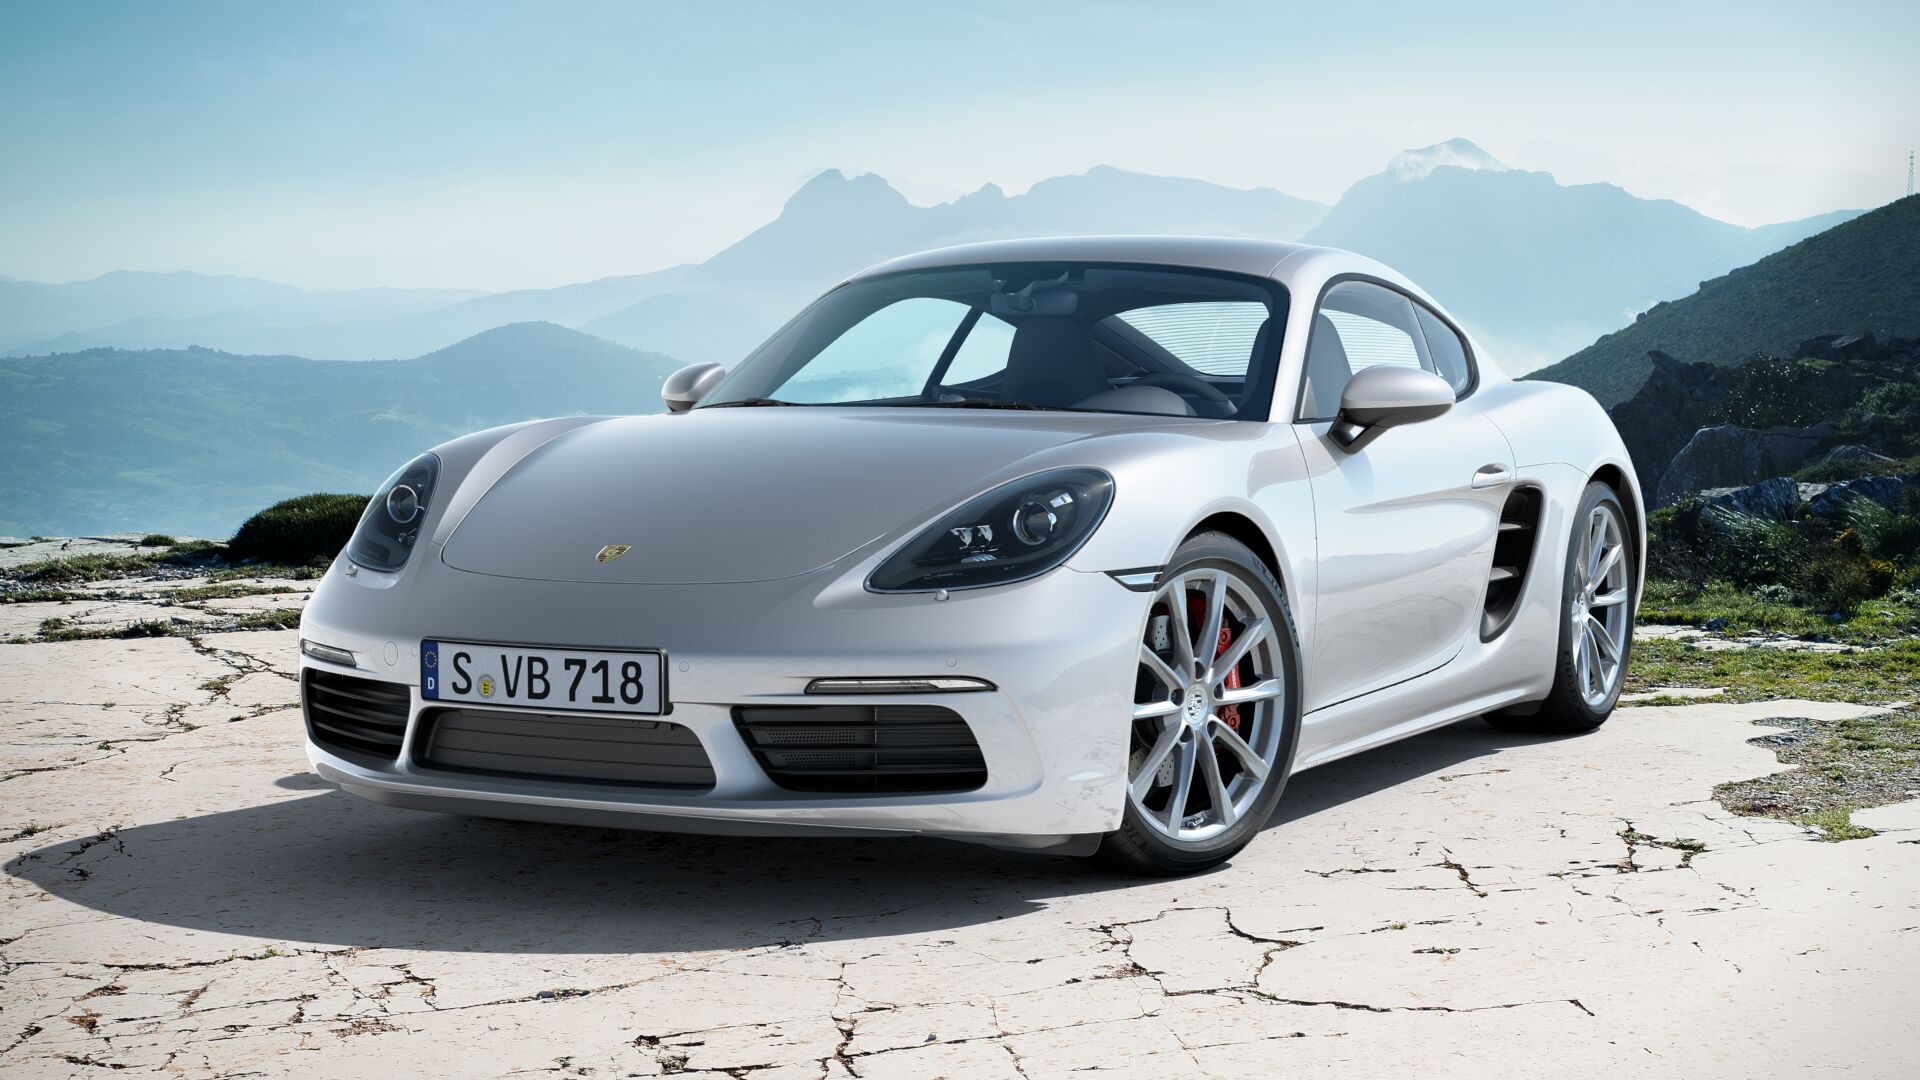 Exterior view of 718 Cayman S